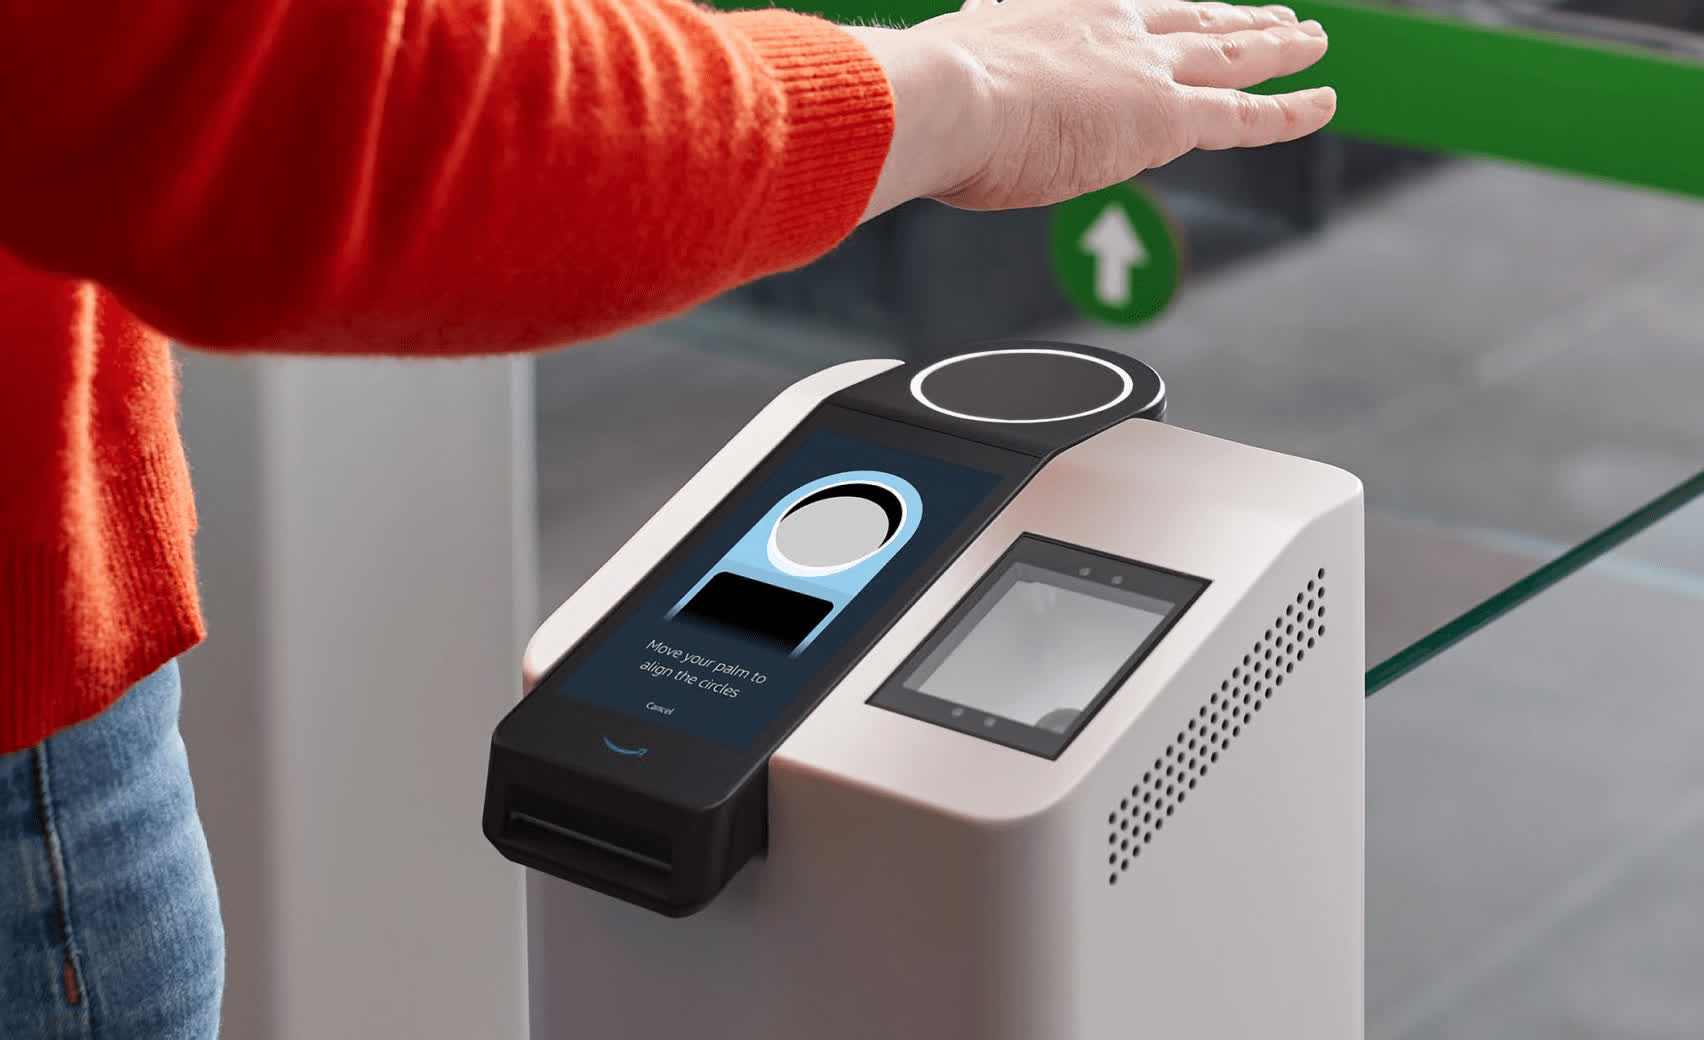 Amazon One is a contactless palm reader used for identity verification